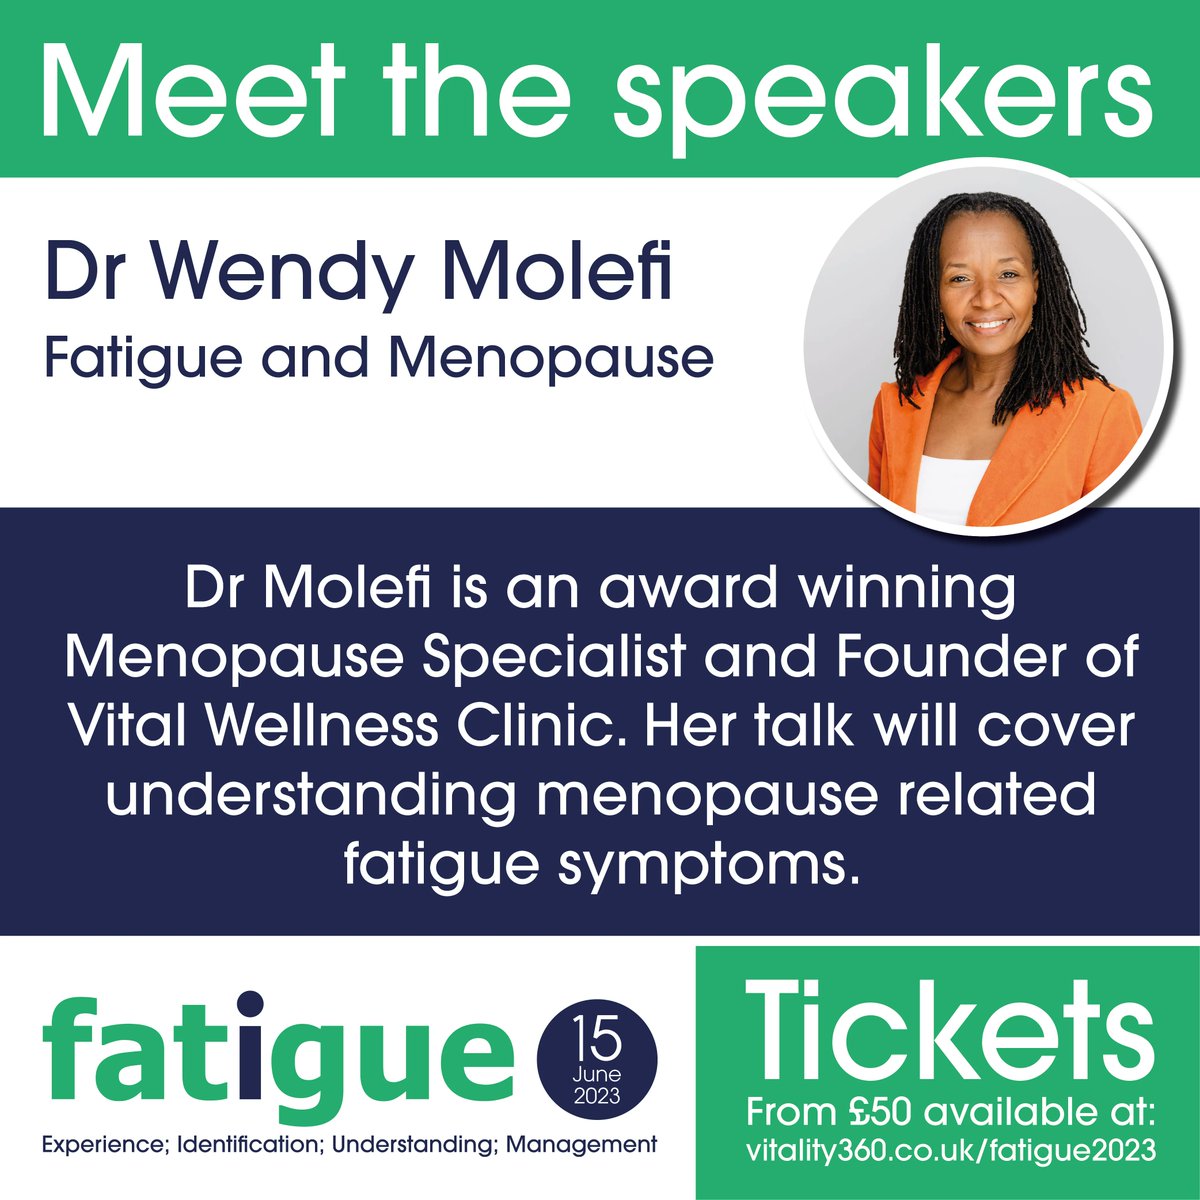 Nearly time for our online conference on all things #fatigue. Looking forward to hearing this speaker talk more about #menopause and fatigu#fatigueconferencev360#incomeprotection #mecfs #fibromyalgia #longcoivd #rehabilitation #returntowork #insuranc#postviralfatigue  #cancer